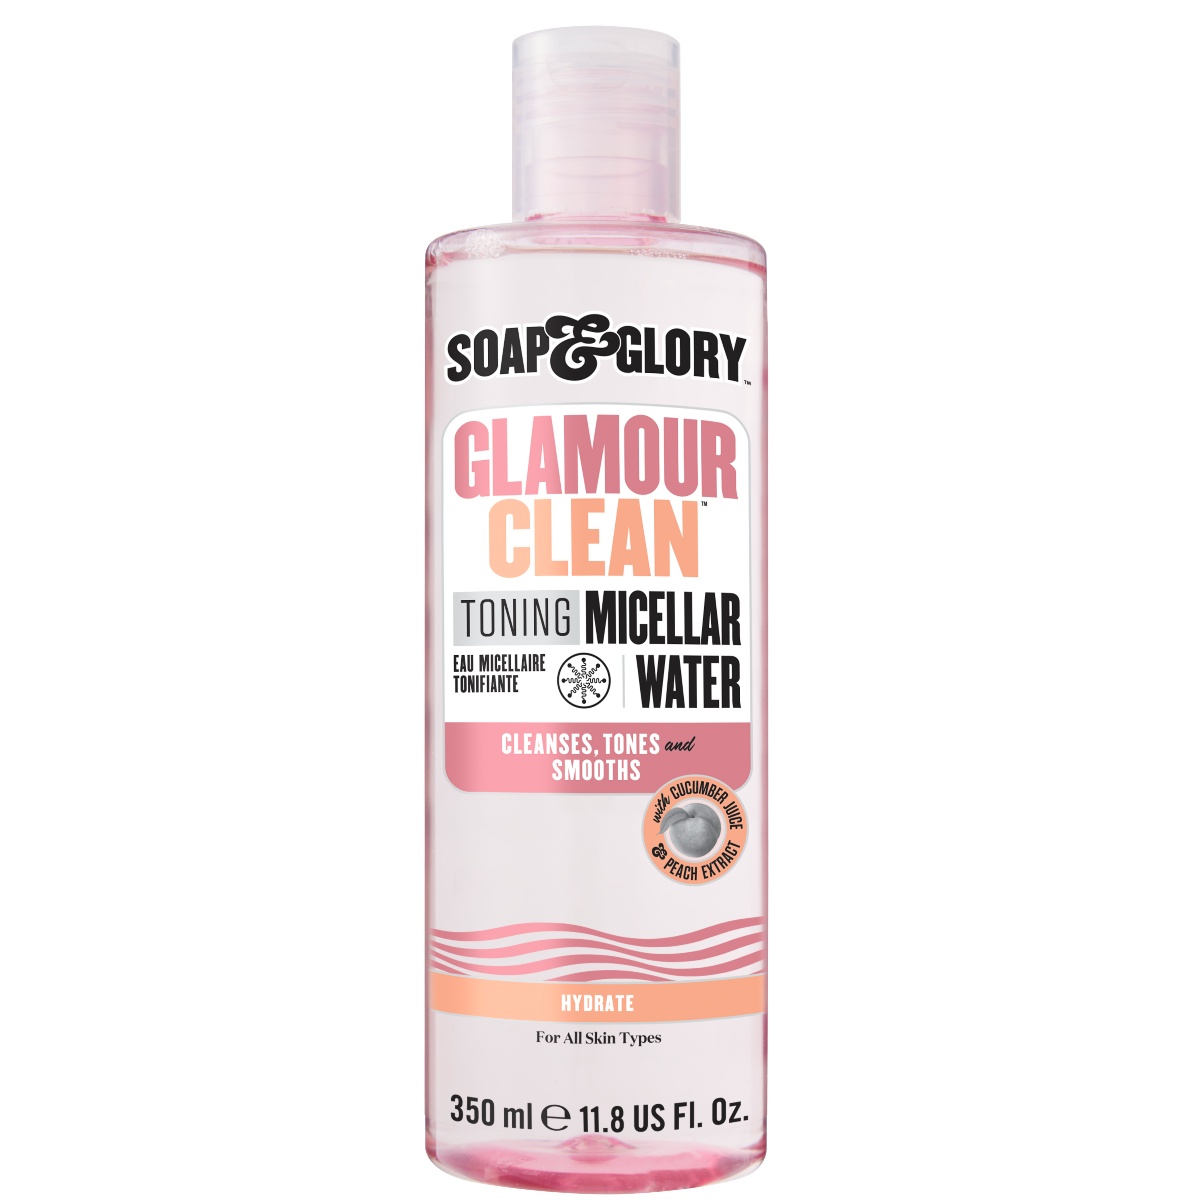 Glamour Clean Toning Micellar Water Makeup Remover